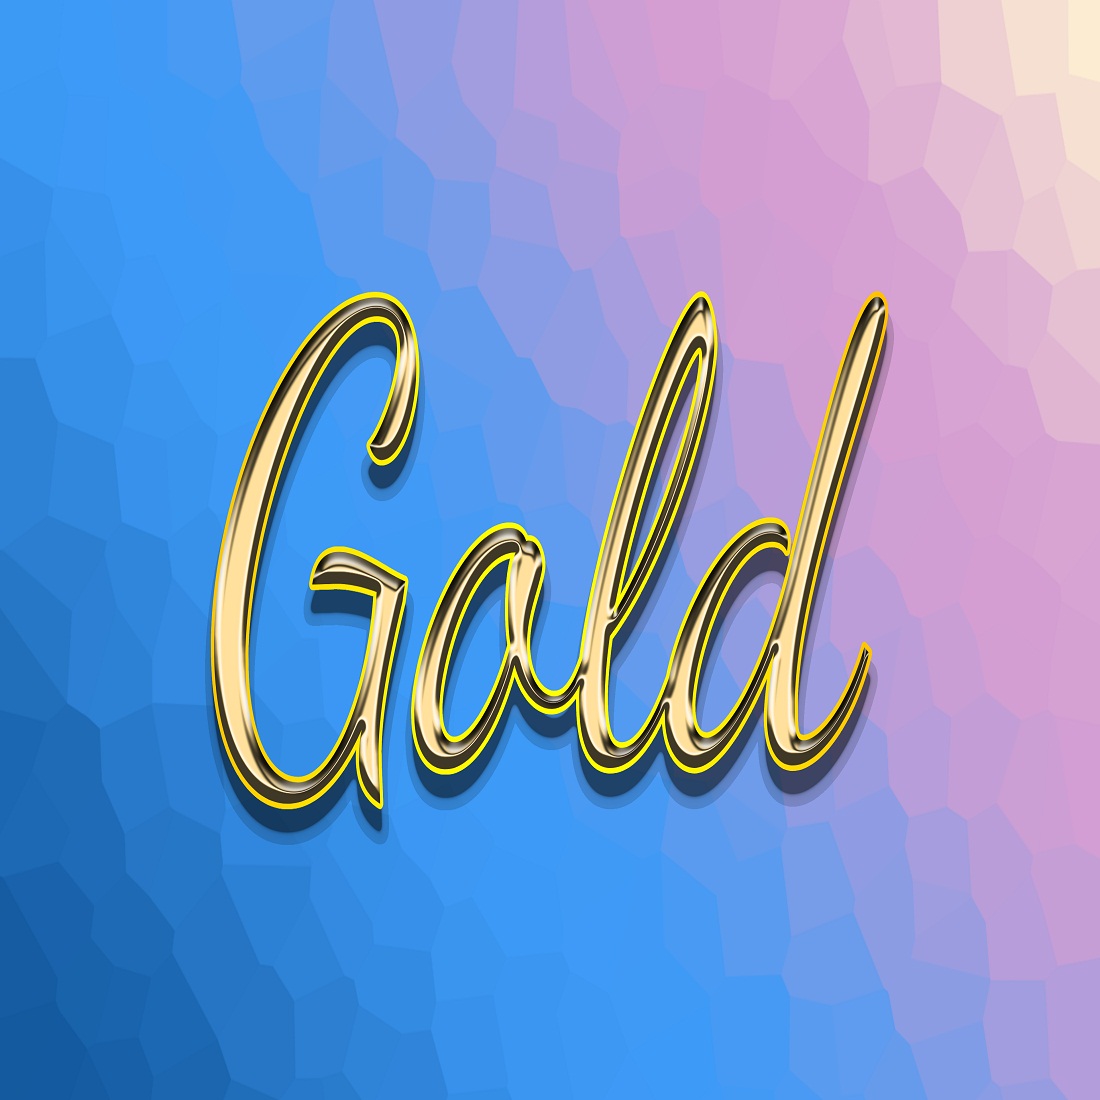 4k Gold Text Effect With Dreamy Polygon Background cover image.